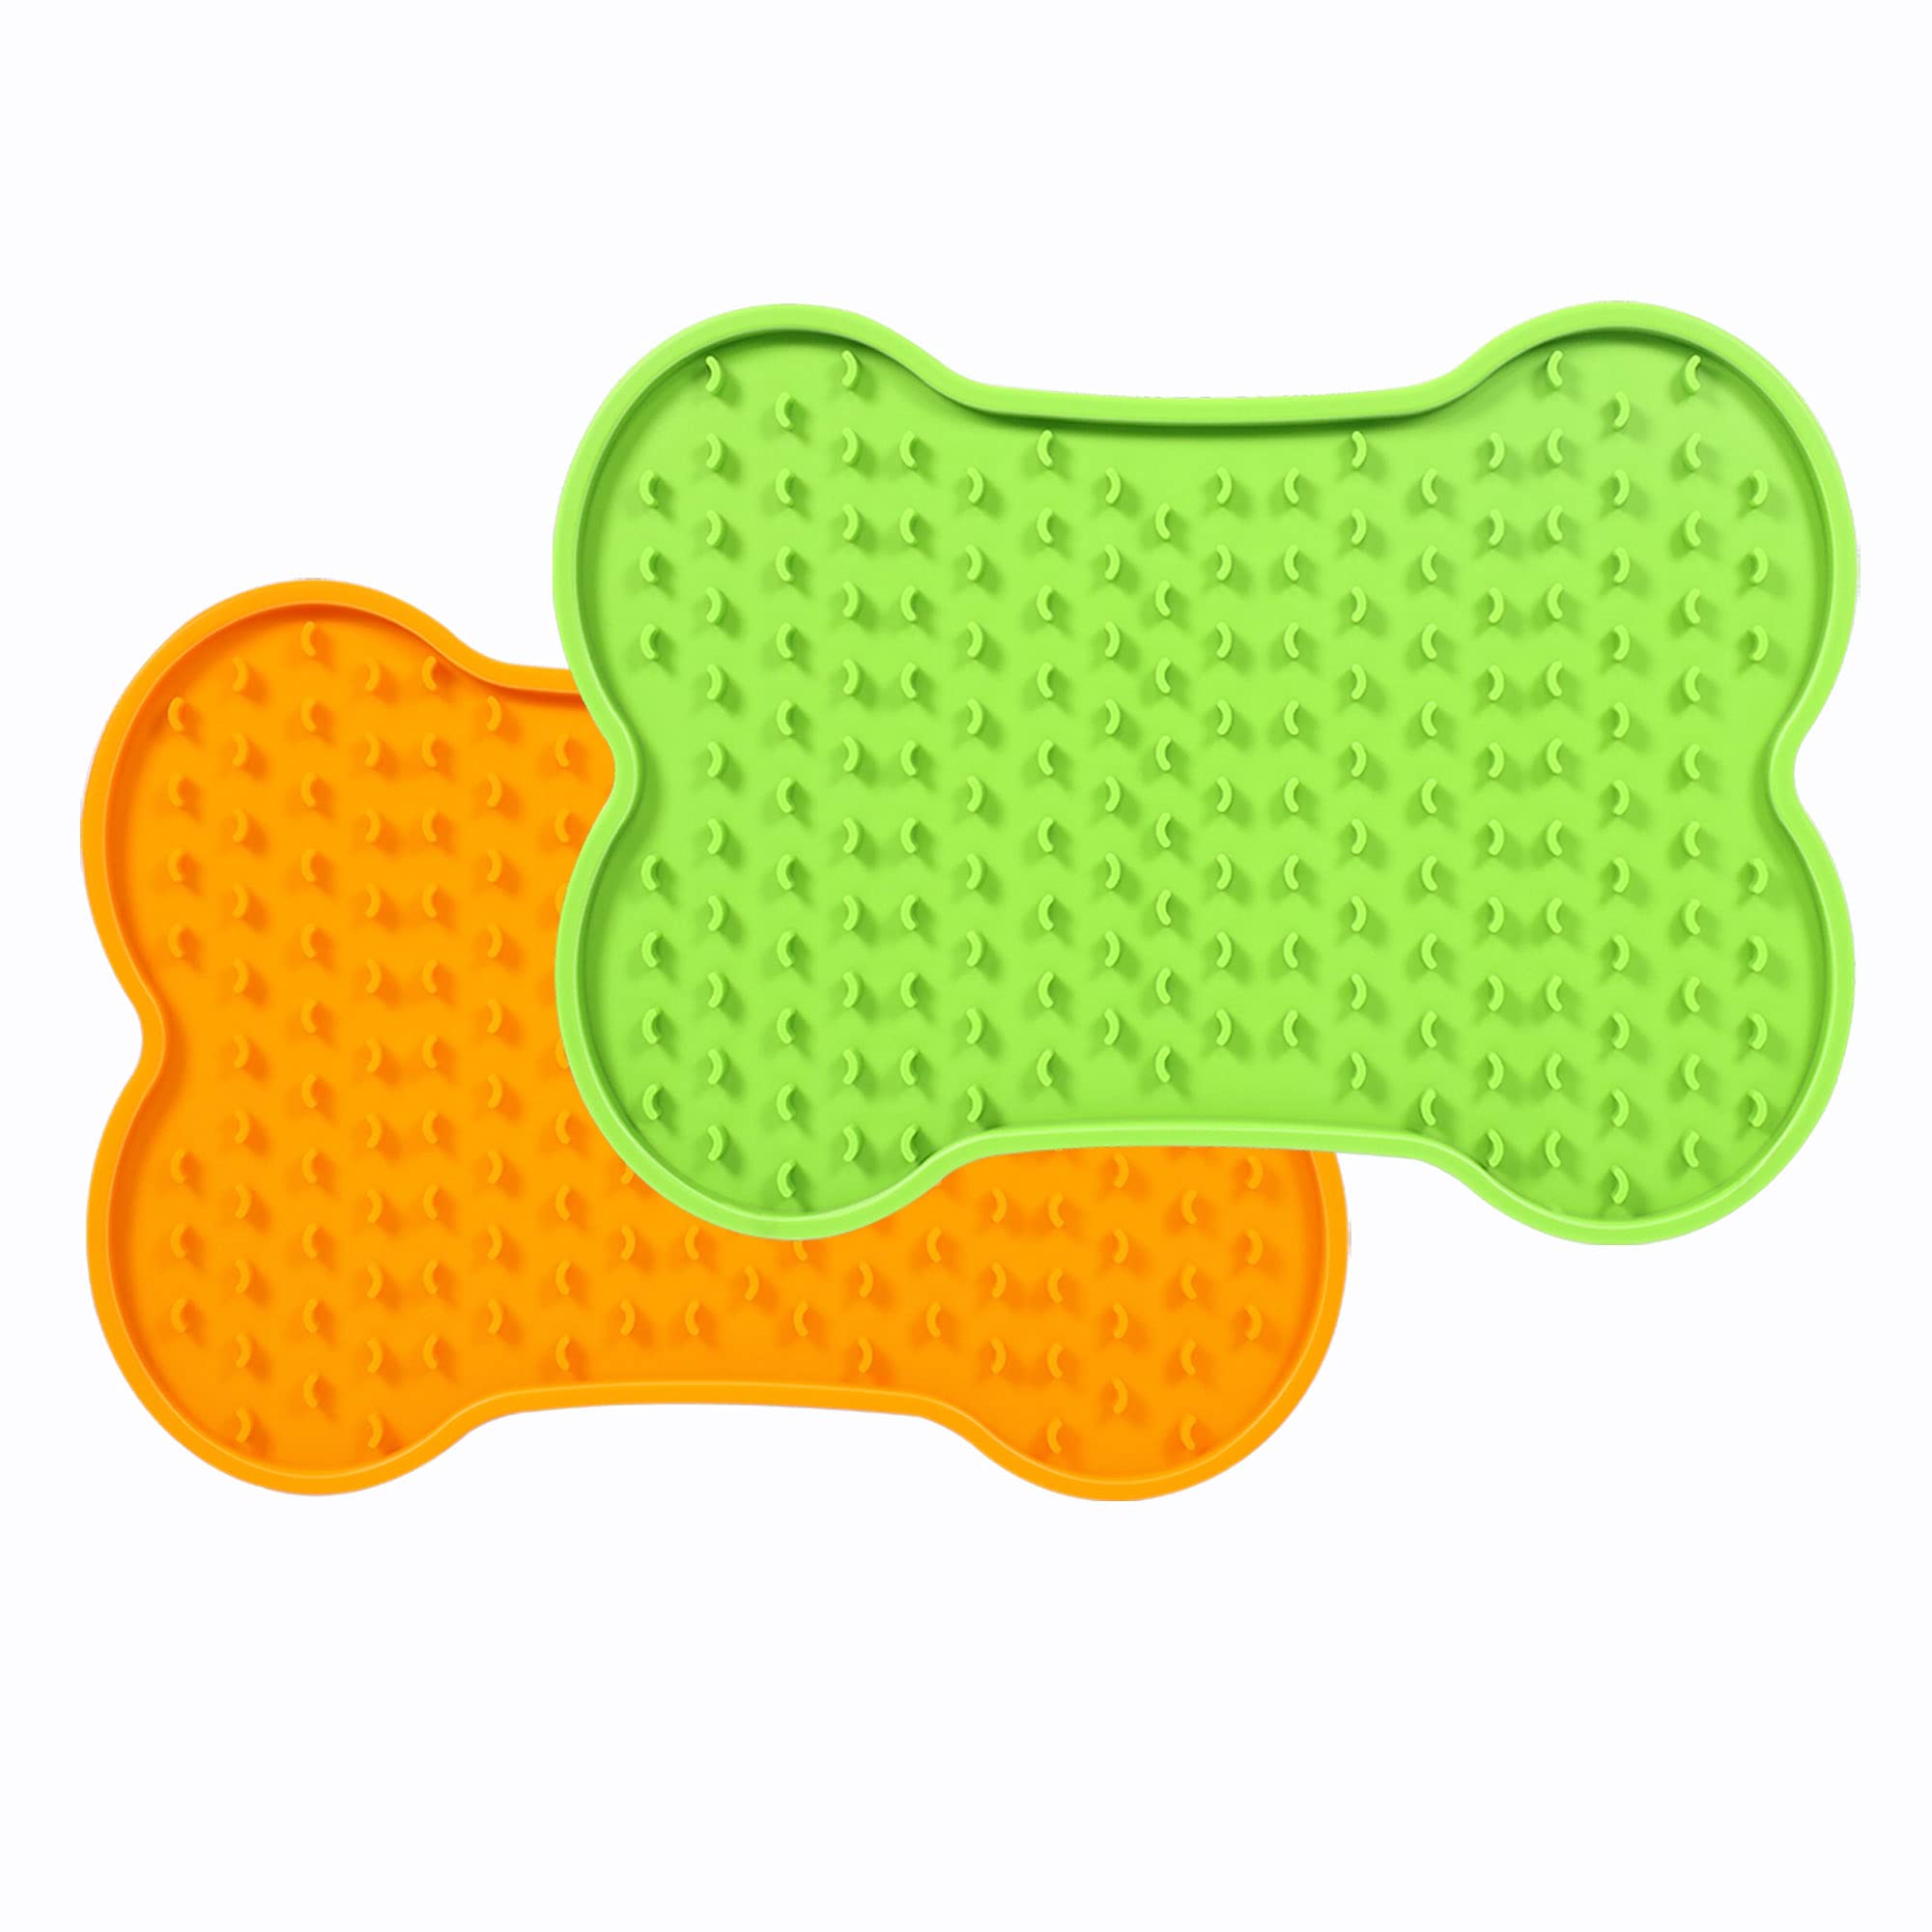 Lick Mat for Dogs & Cats - Paw Shape, 2 pack